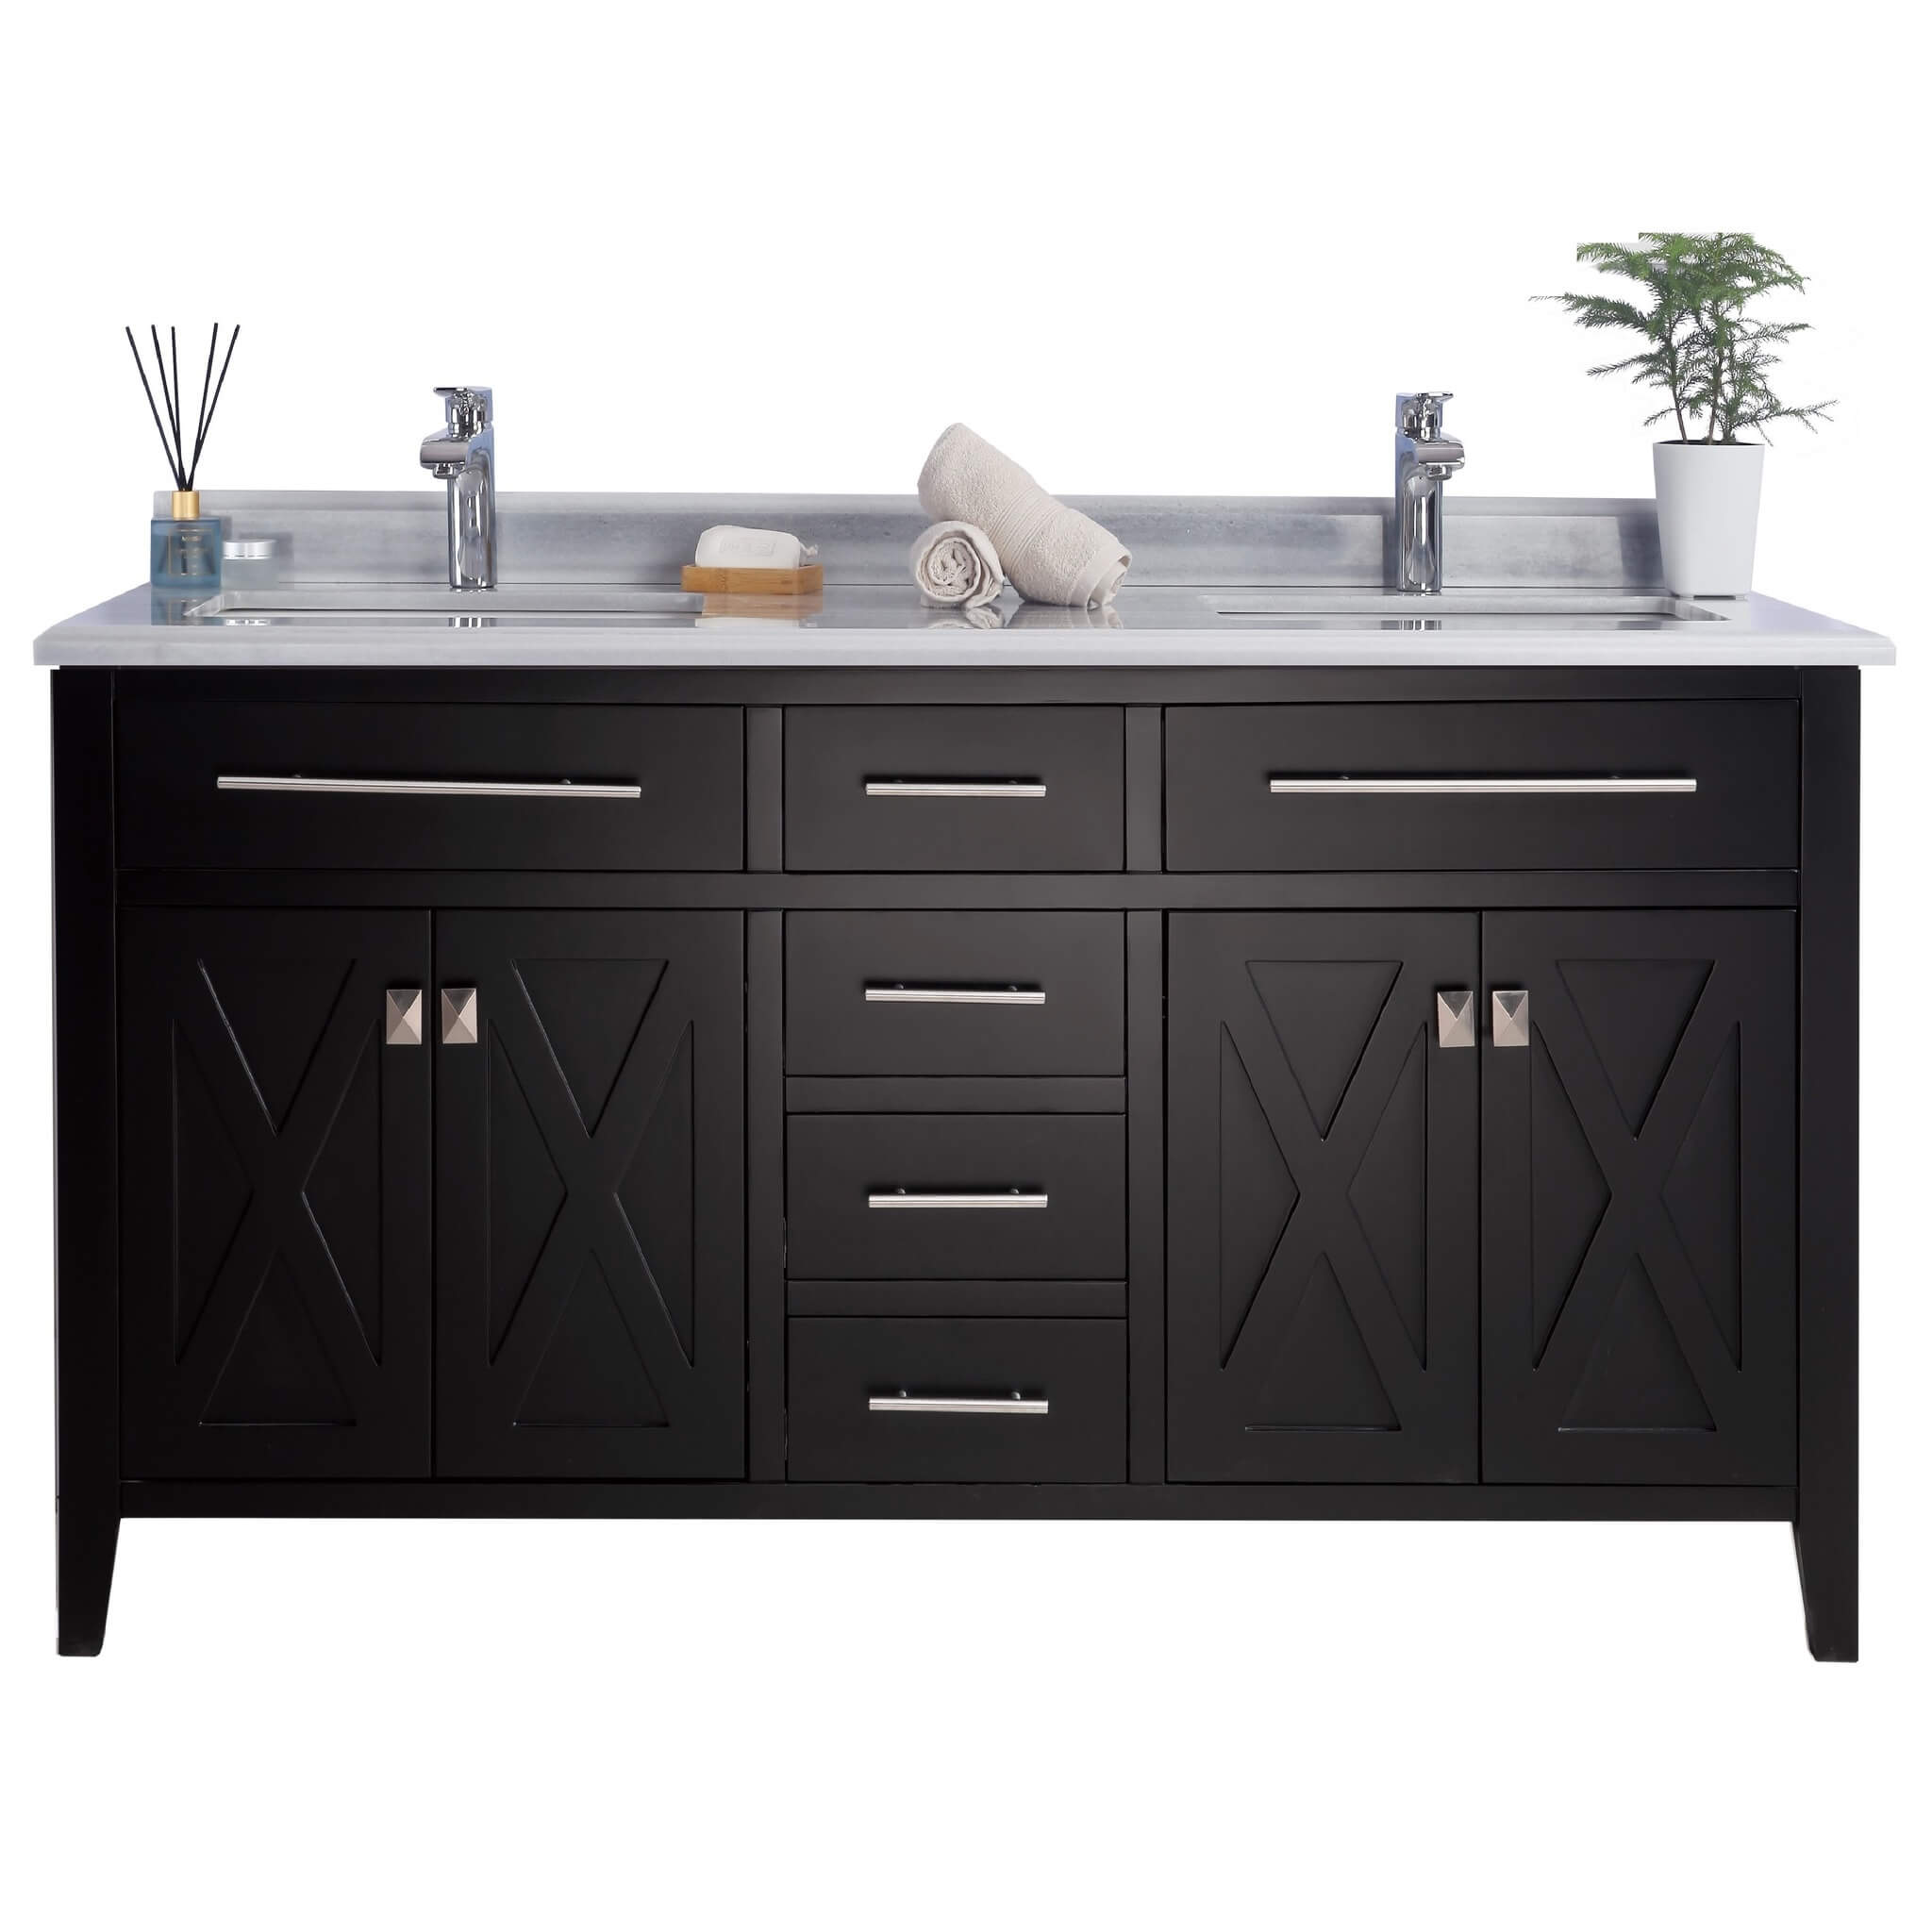 LAVIVA Wimbledon 313YG319-60E-WS 60" Single Bathroom Vanity in Espresso with White Stripes Marble, White Rectangle Sinks, Front View